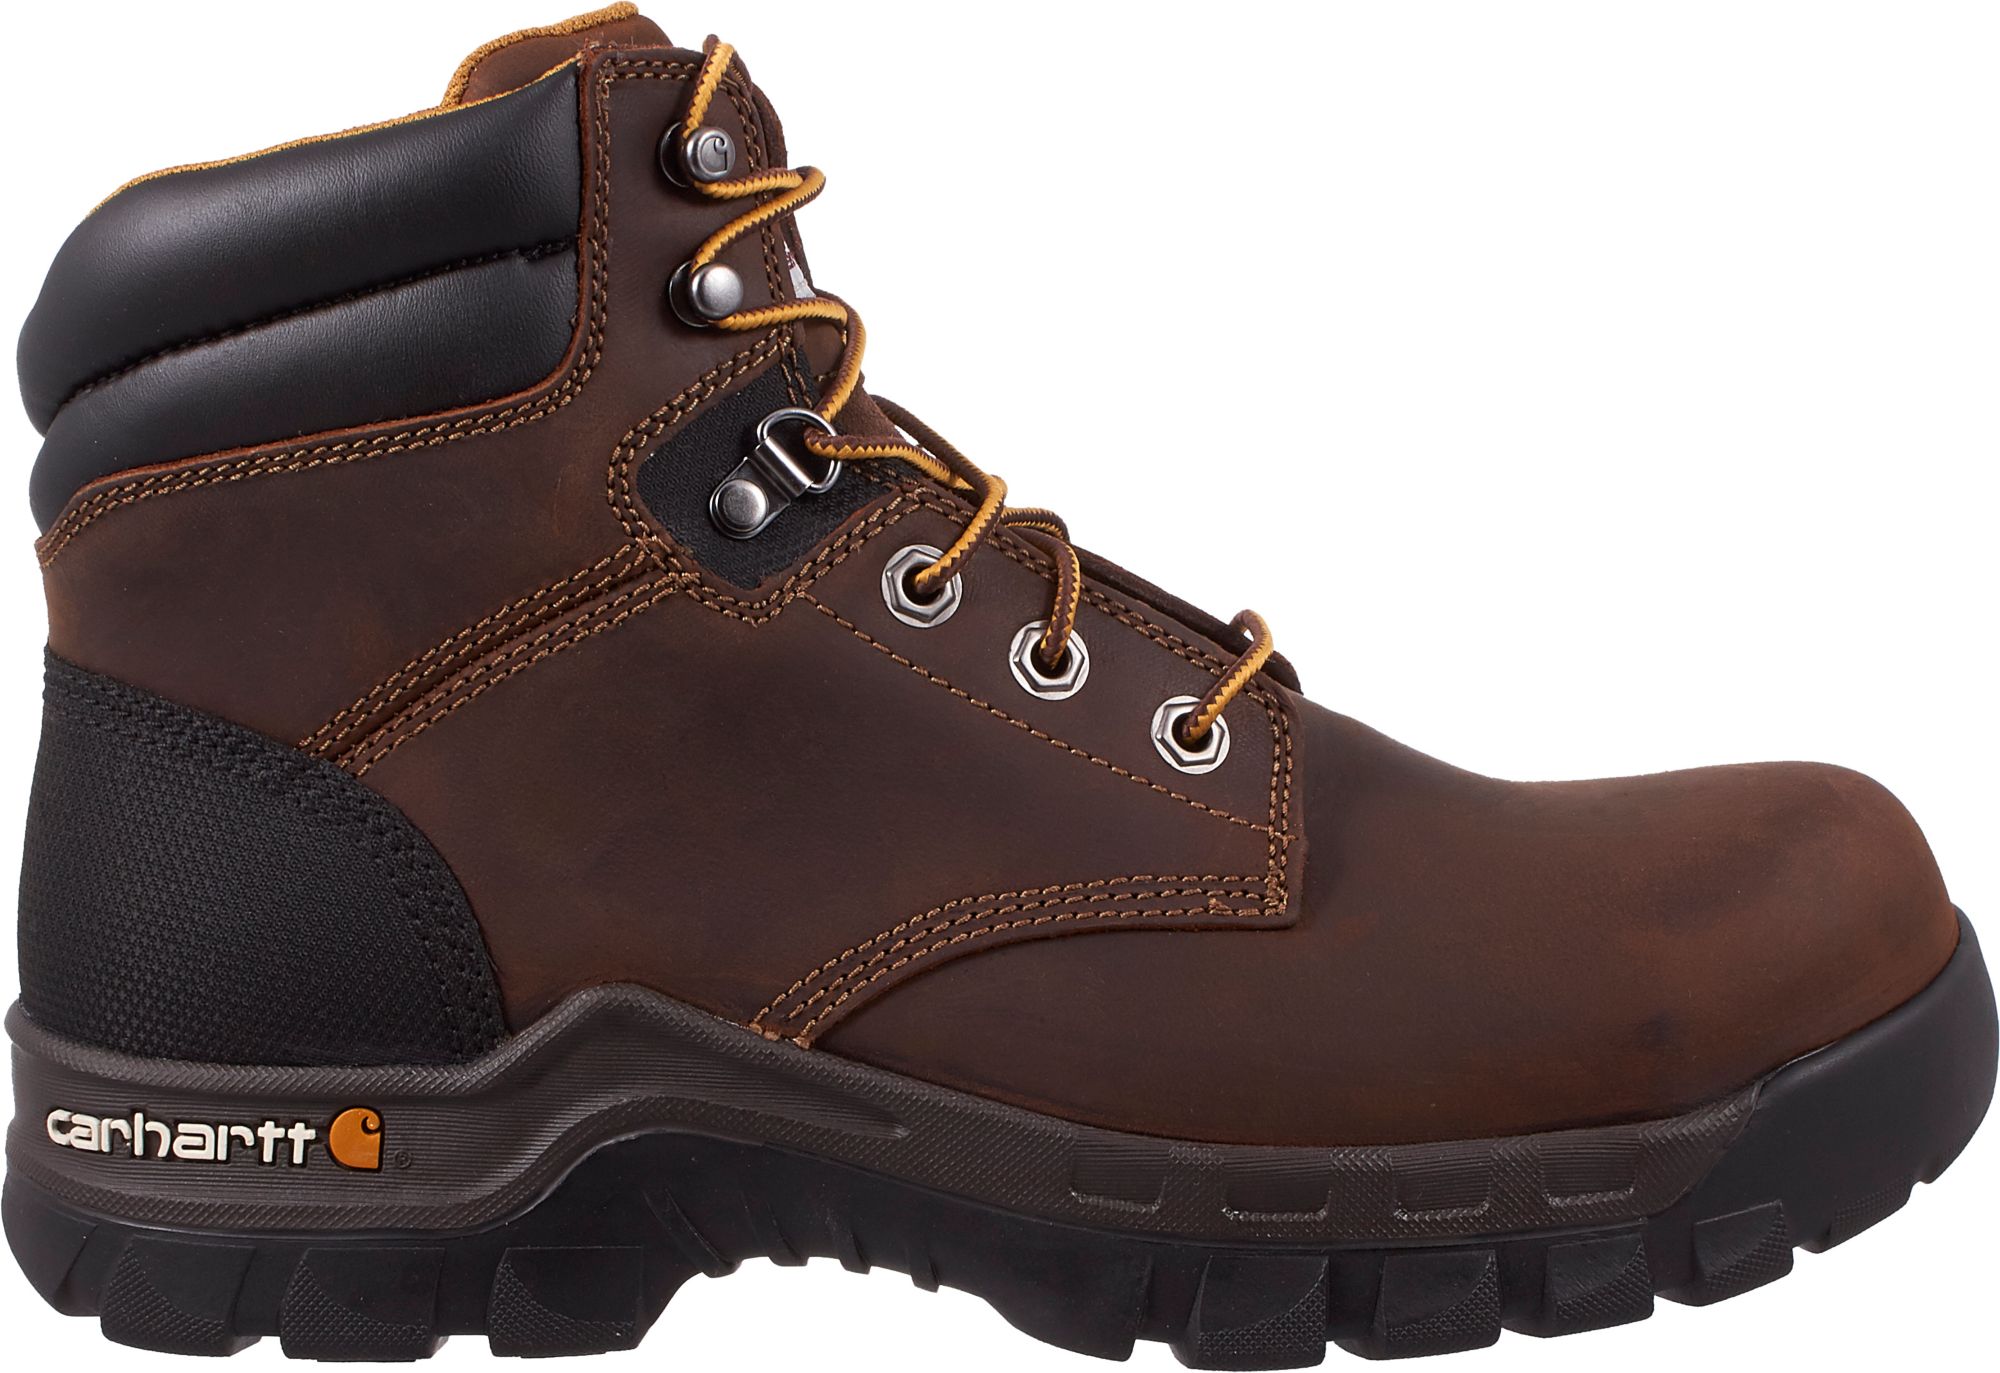 carhartt safety toe work boots